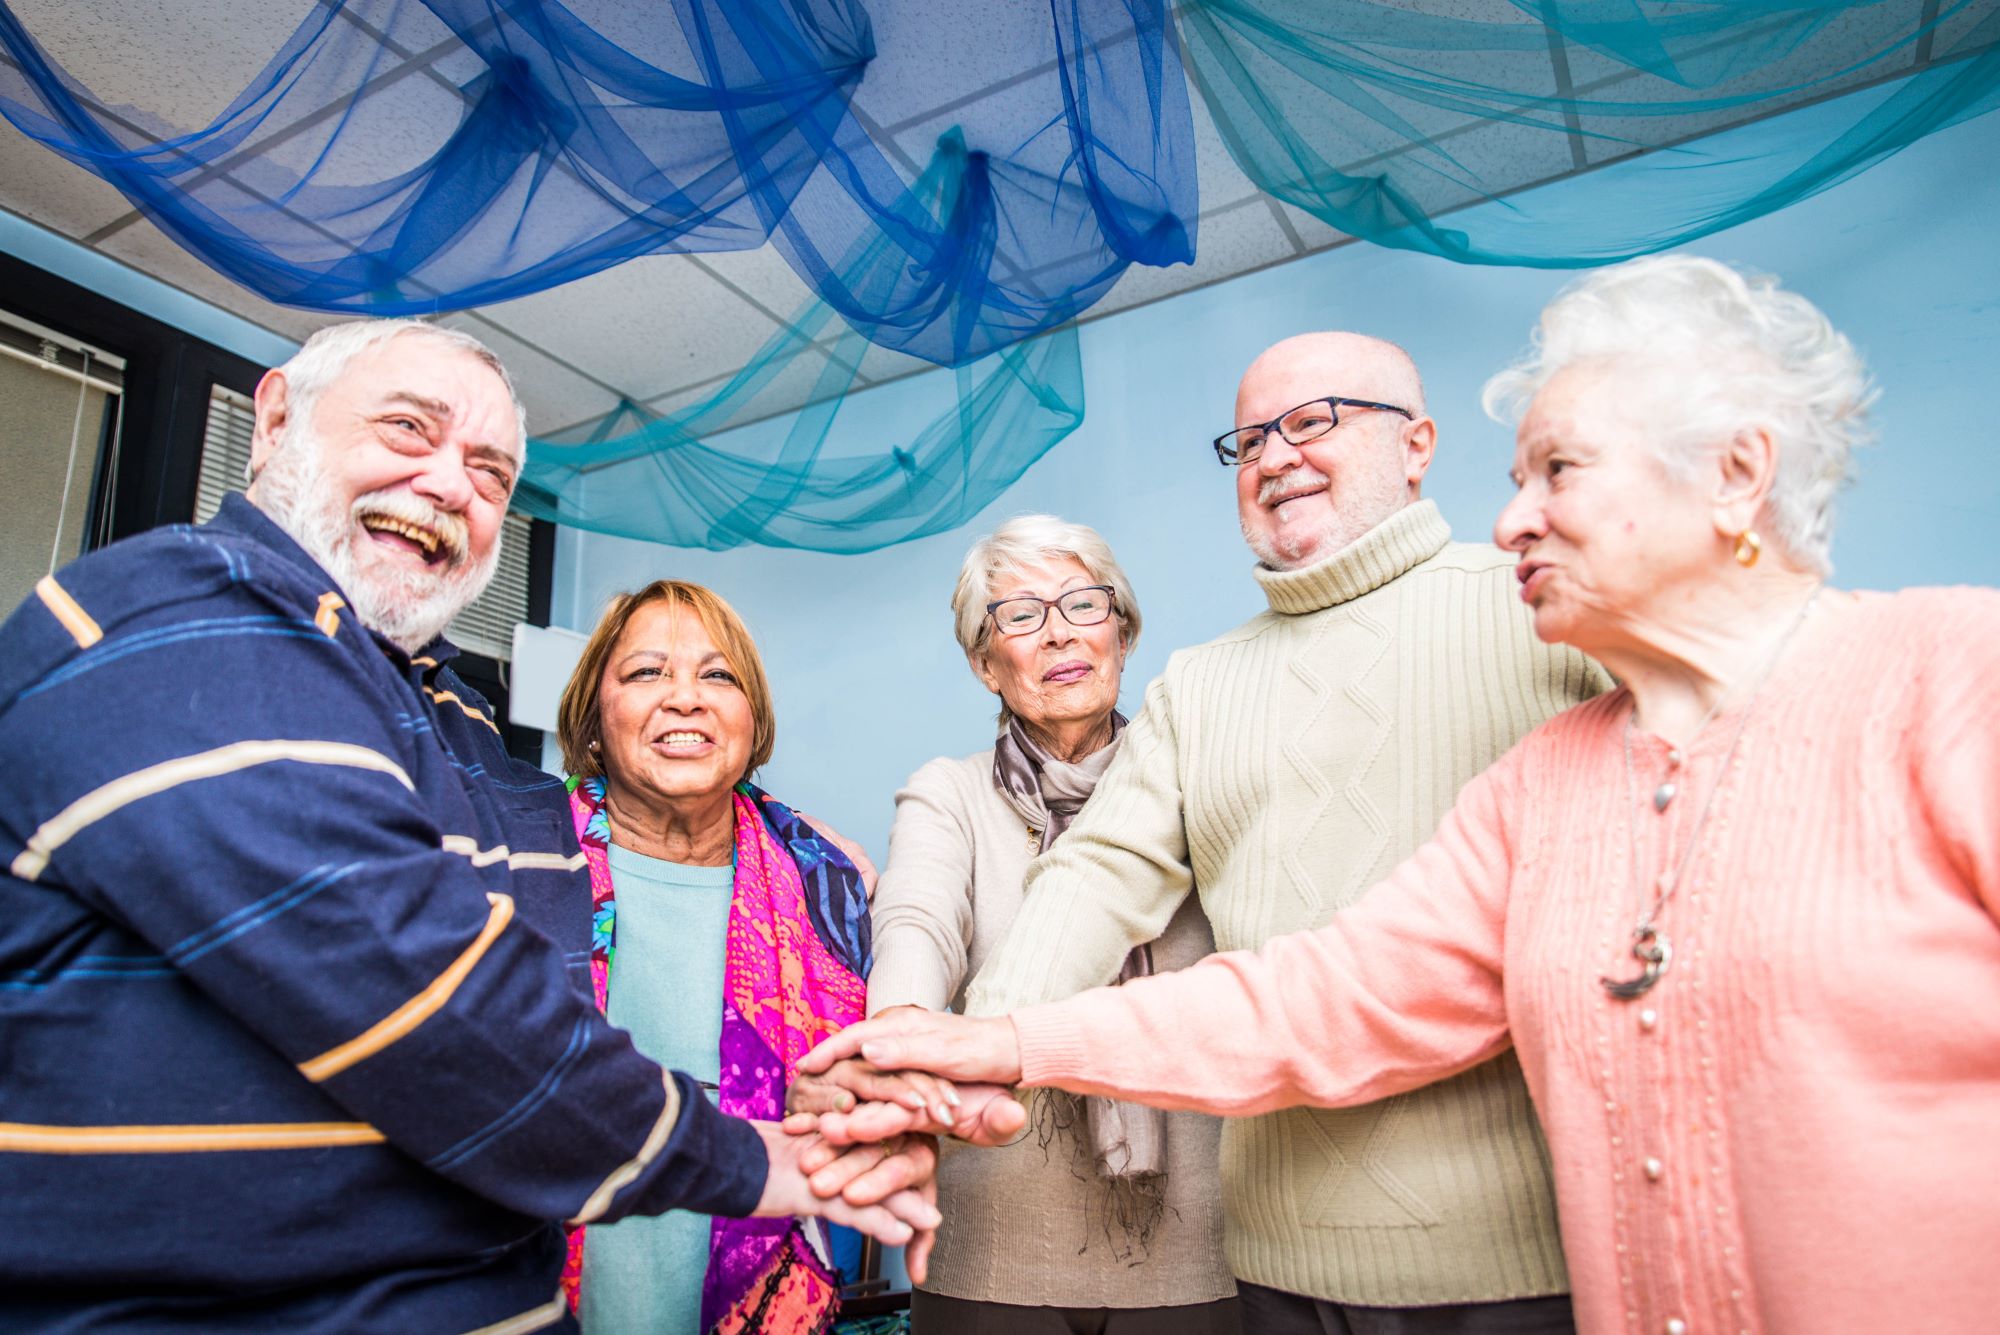 group of smiling and happy seniors, male and female, in an adult day care or adult day health care setting, blue streamers hanging from ceiling above